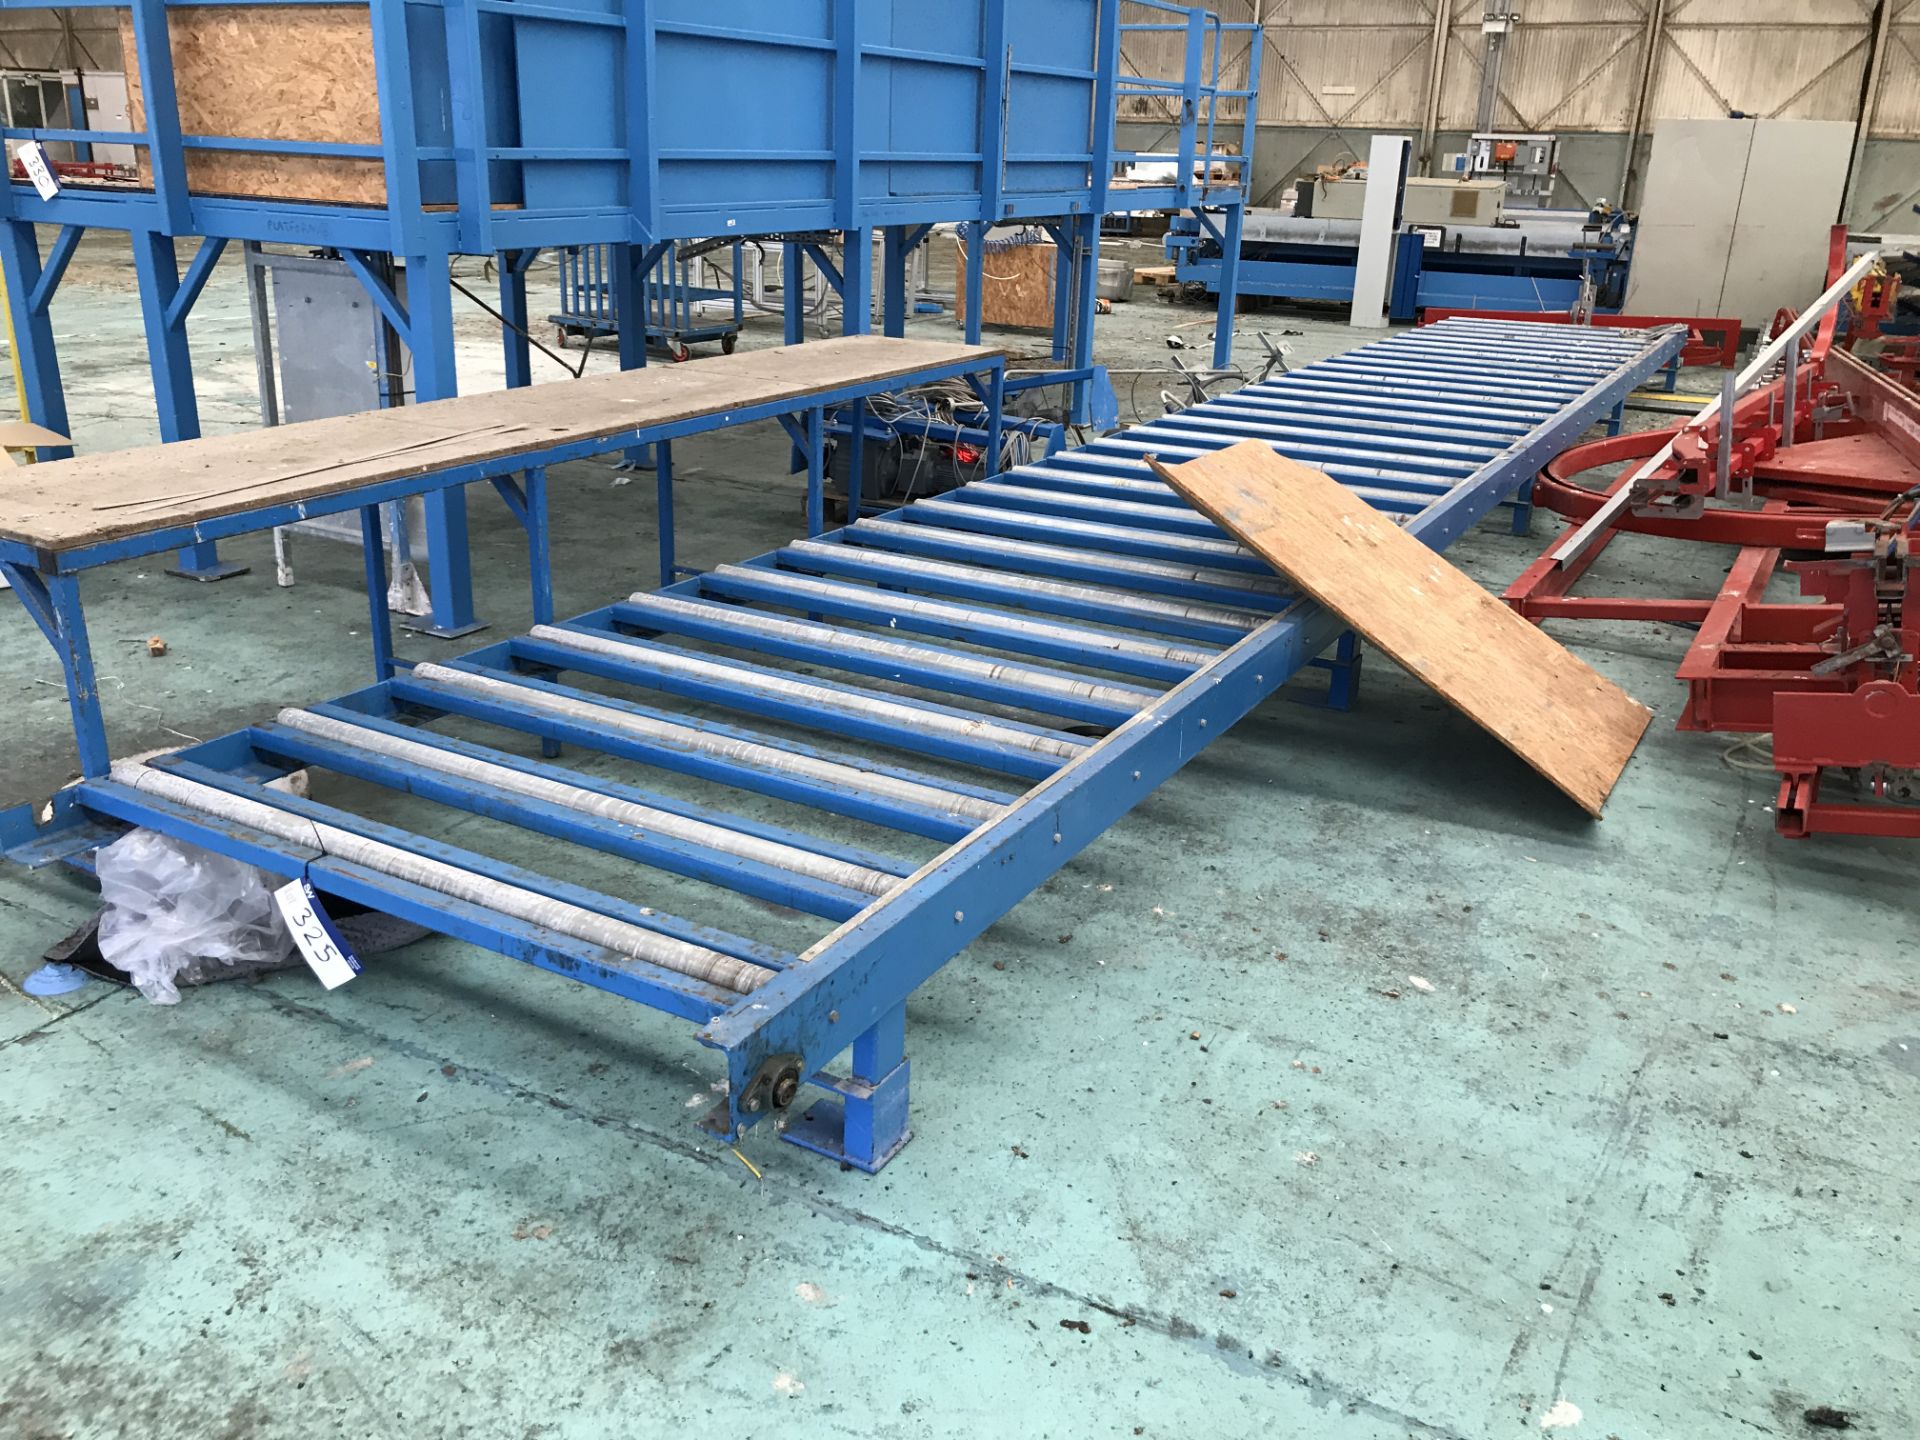 Powered Roller Conveyor, approx. 1.7m wide on rollers x 10.5m long